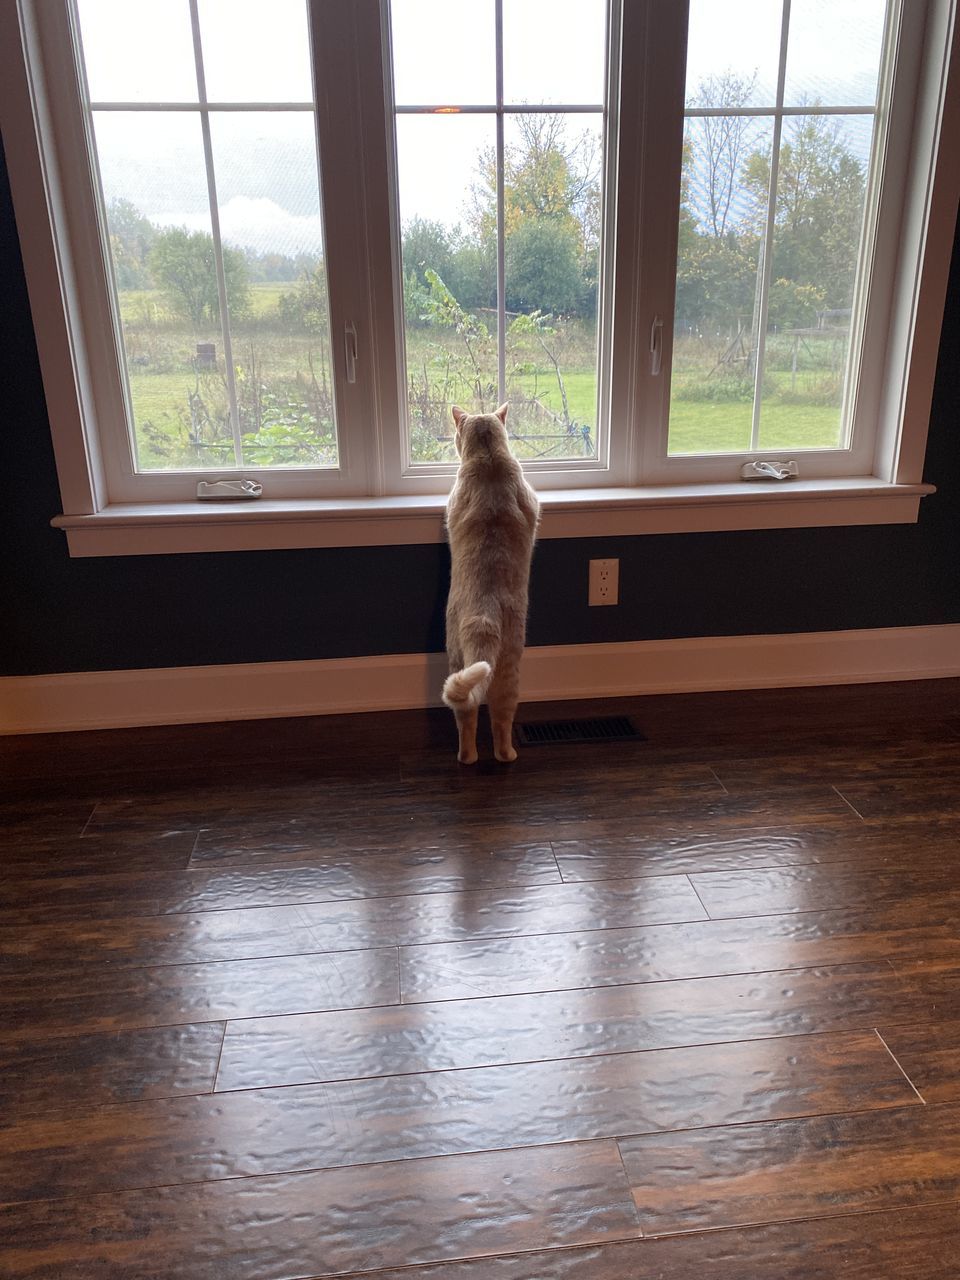 window, wood, indoors, window covering, room, interior design, wall, no people, one animal, animal, day, home, animal themes, home interior, door, glass, hardwood, pet, entrance, domestic animals, floor, house, mammal, nature, transparent, window treatment, sunlight, architecture, window blind